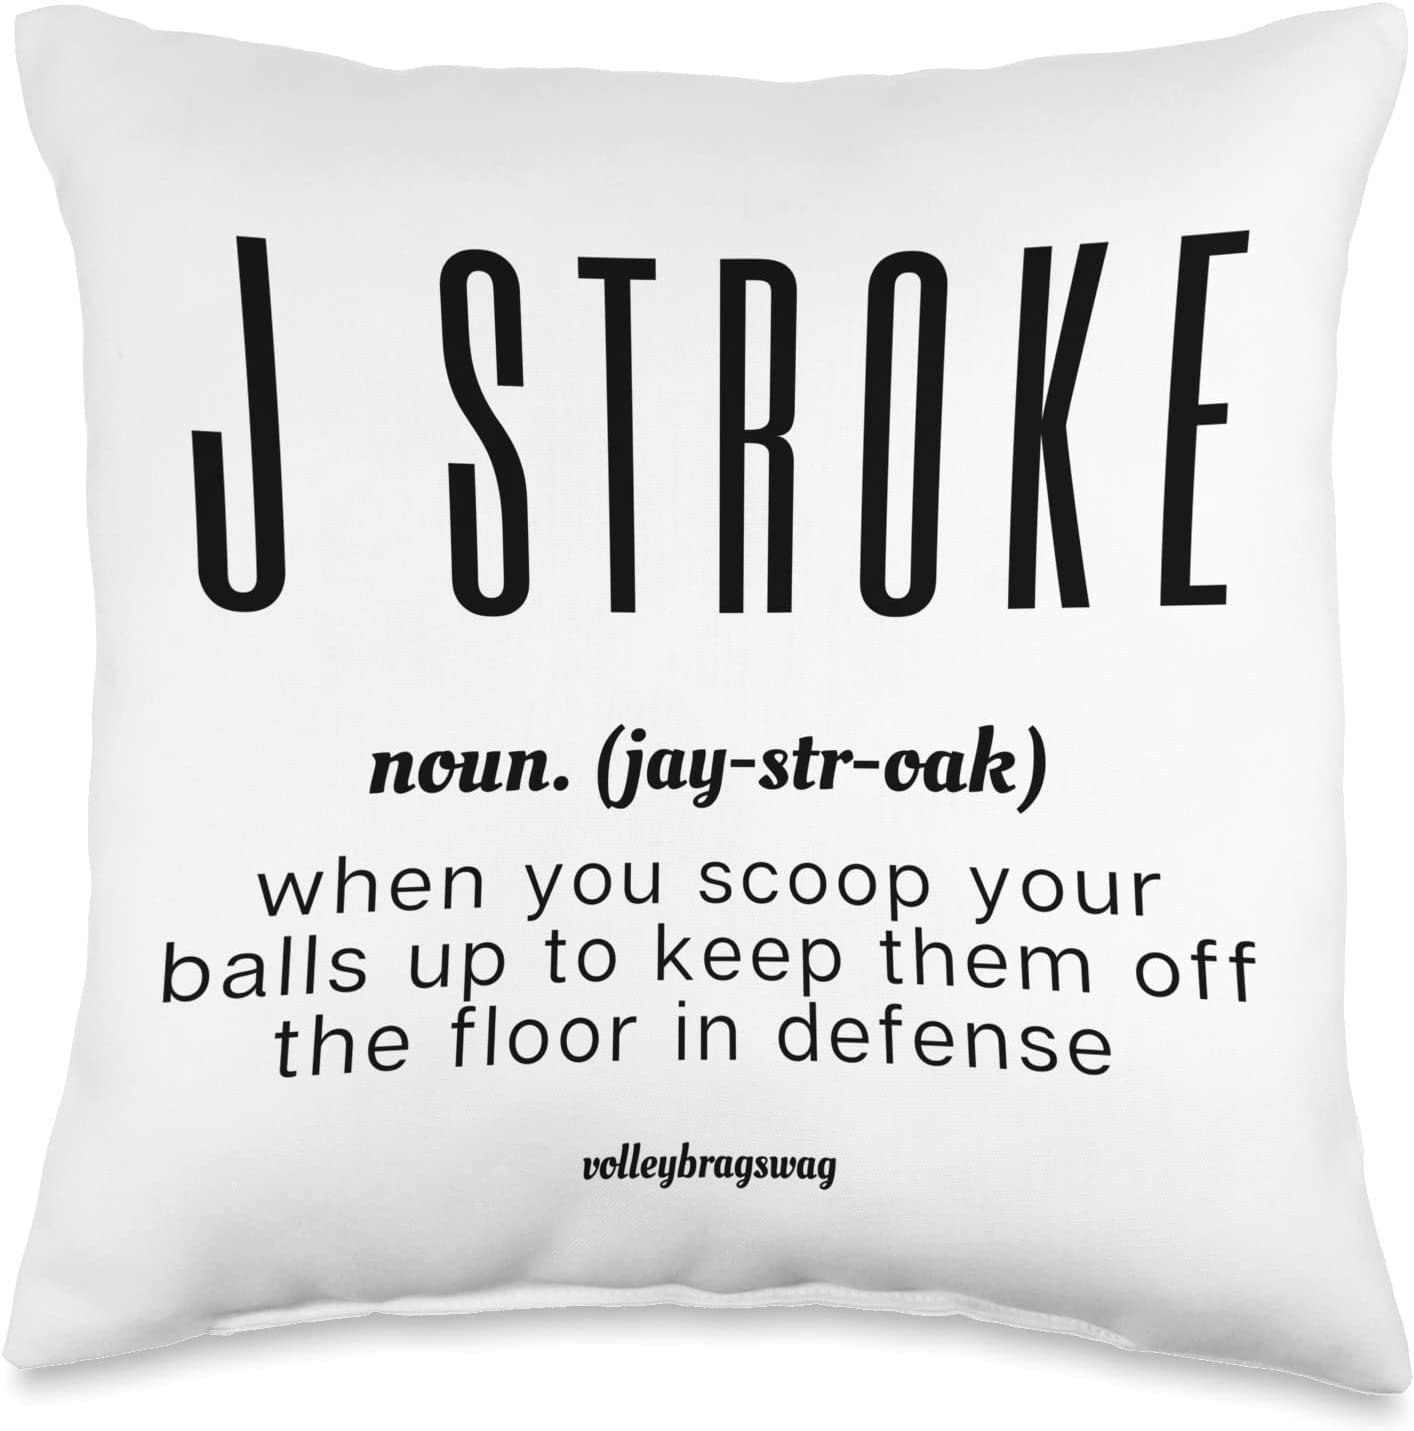 J Stroke- When You Scoop your Balls To Keep Them off The Floor In Defense